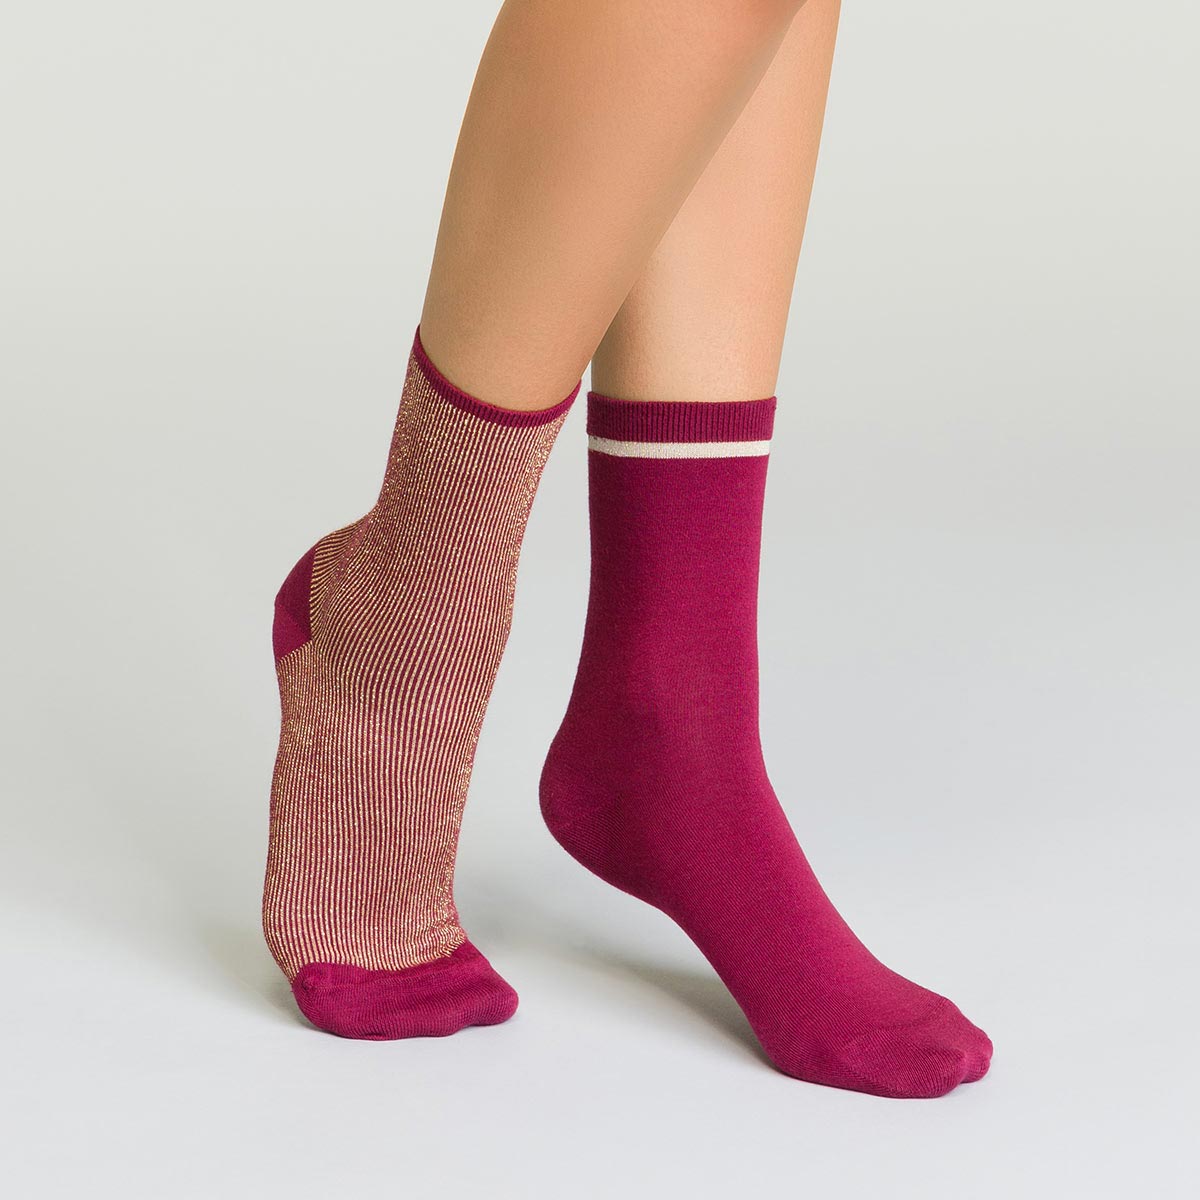 2 pack burgundy and gold women's socks with striped lurex